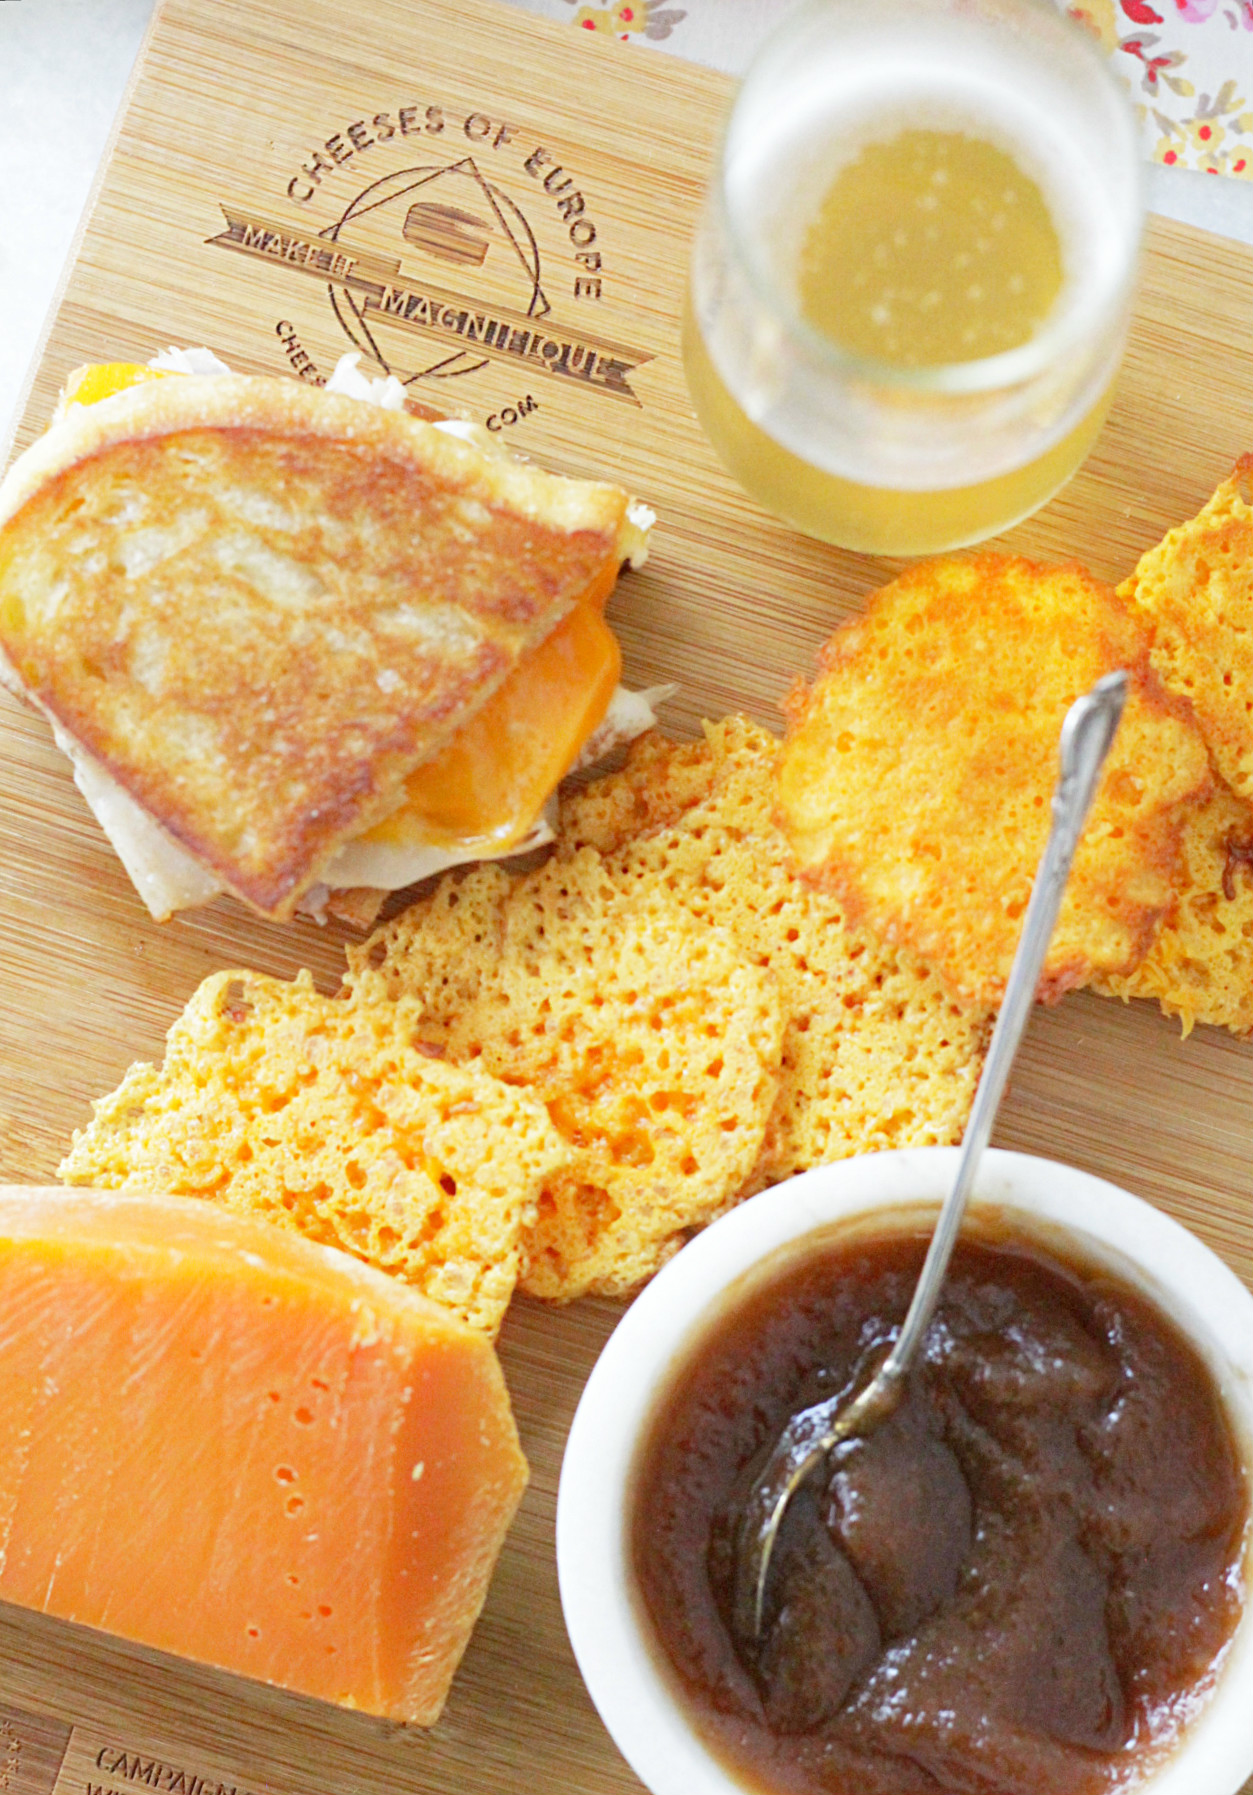 Cheeses of Europe | Foodtastic Mom #cheese #europe #cheesesofeurope #mimolette